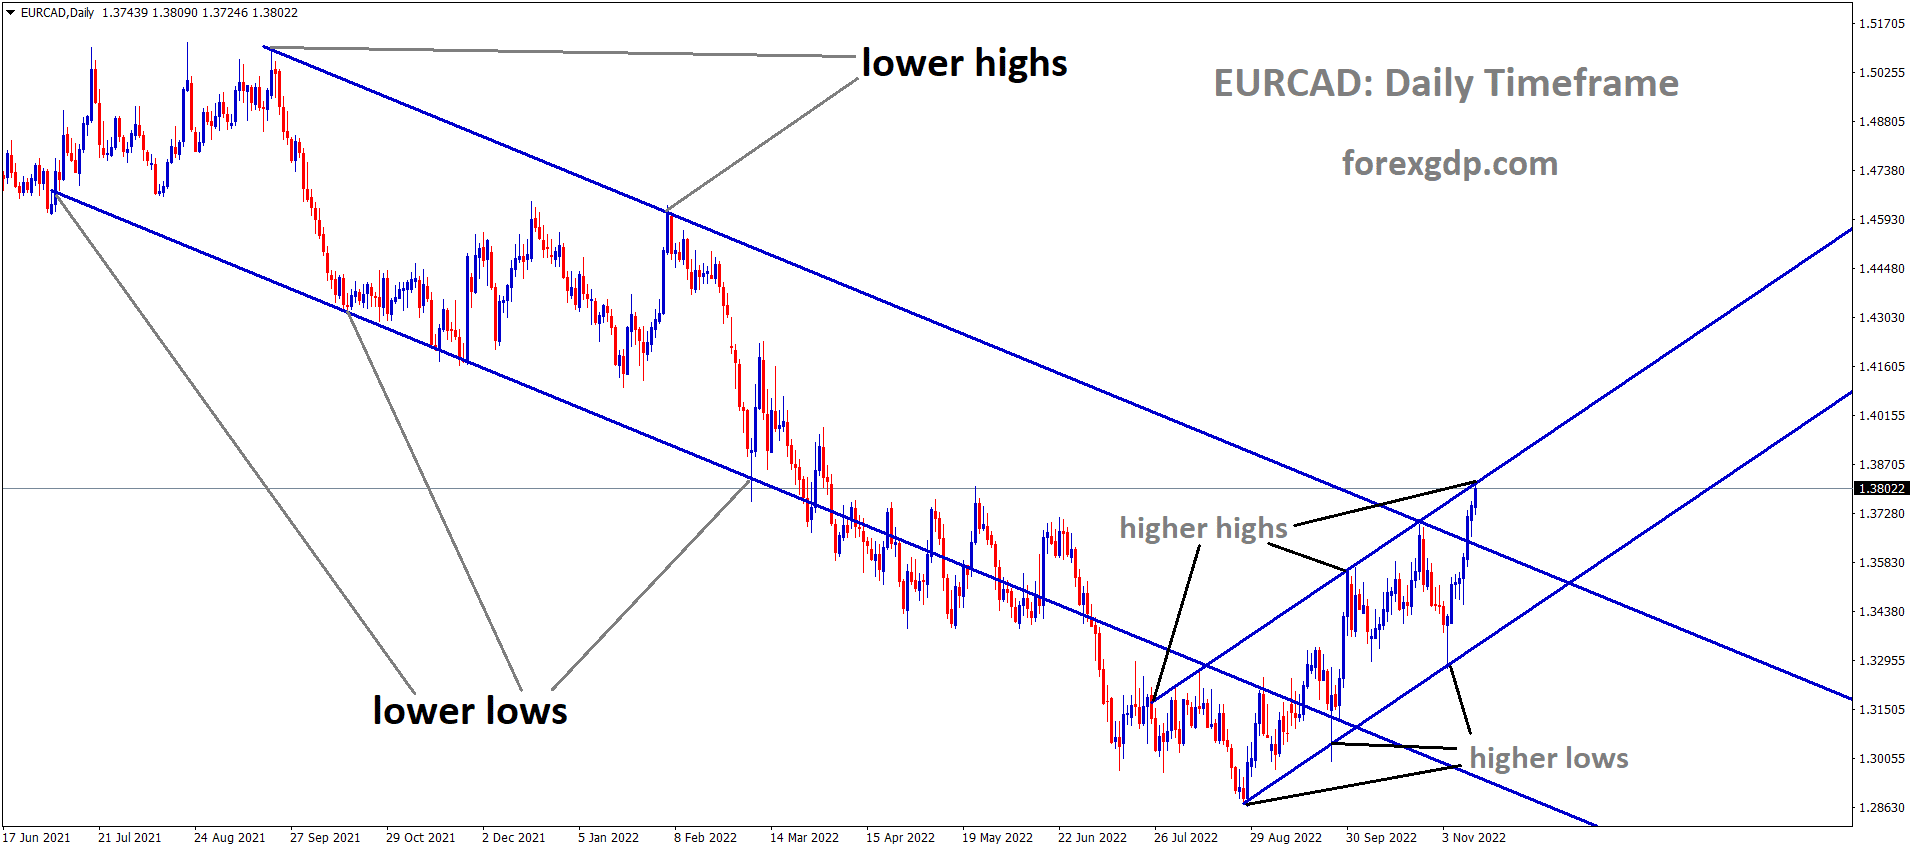 EURCAD is moving in the Major Descending channel and the market has reached the higher high area of the minor Ascending channel.